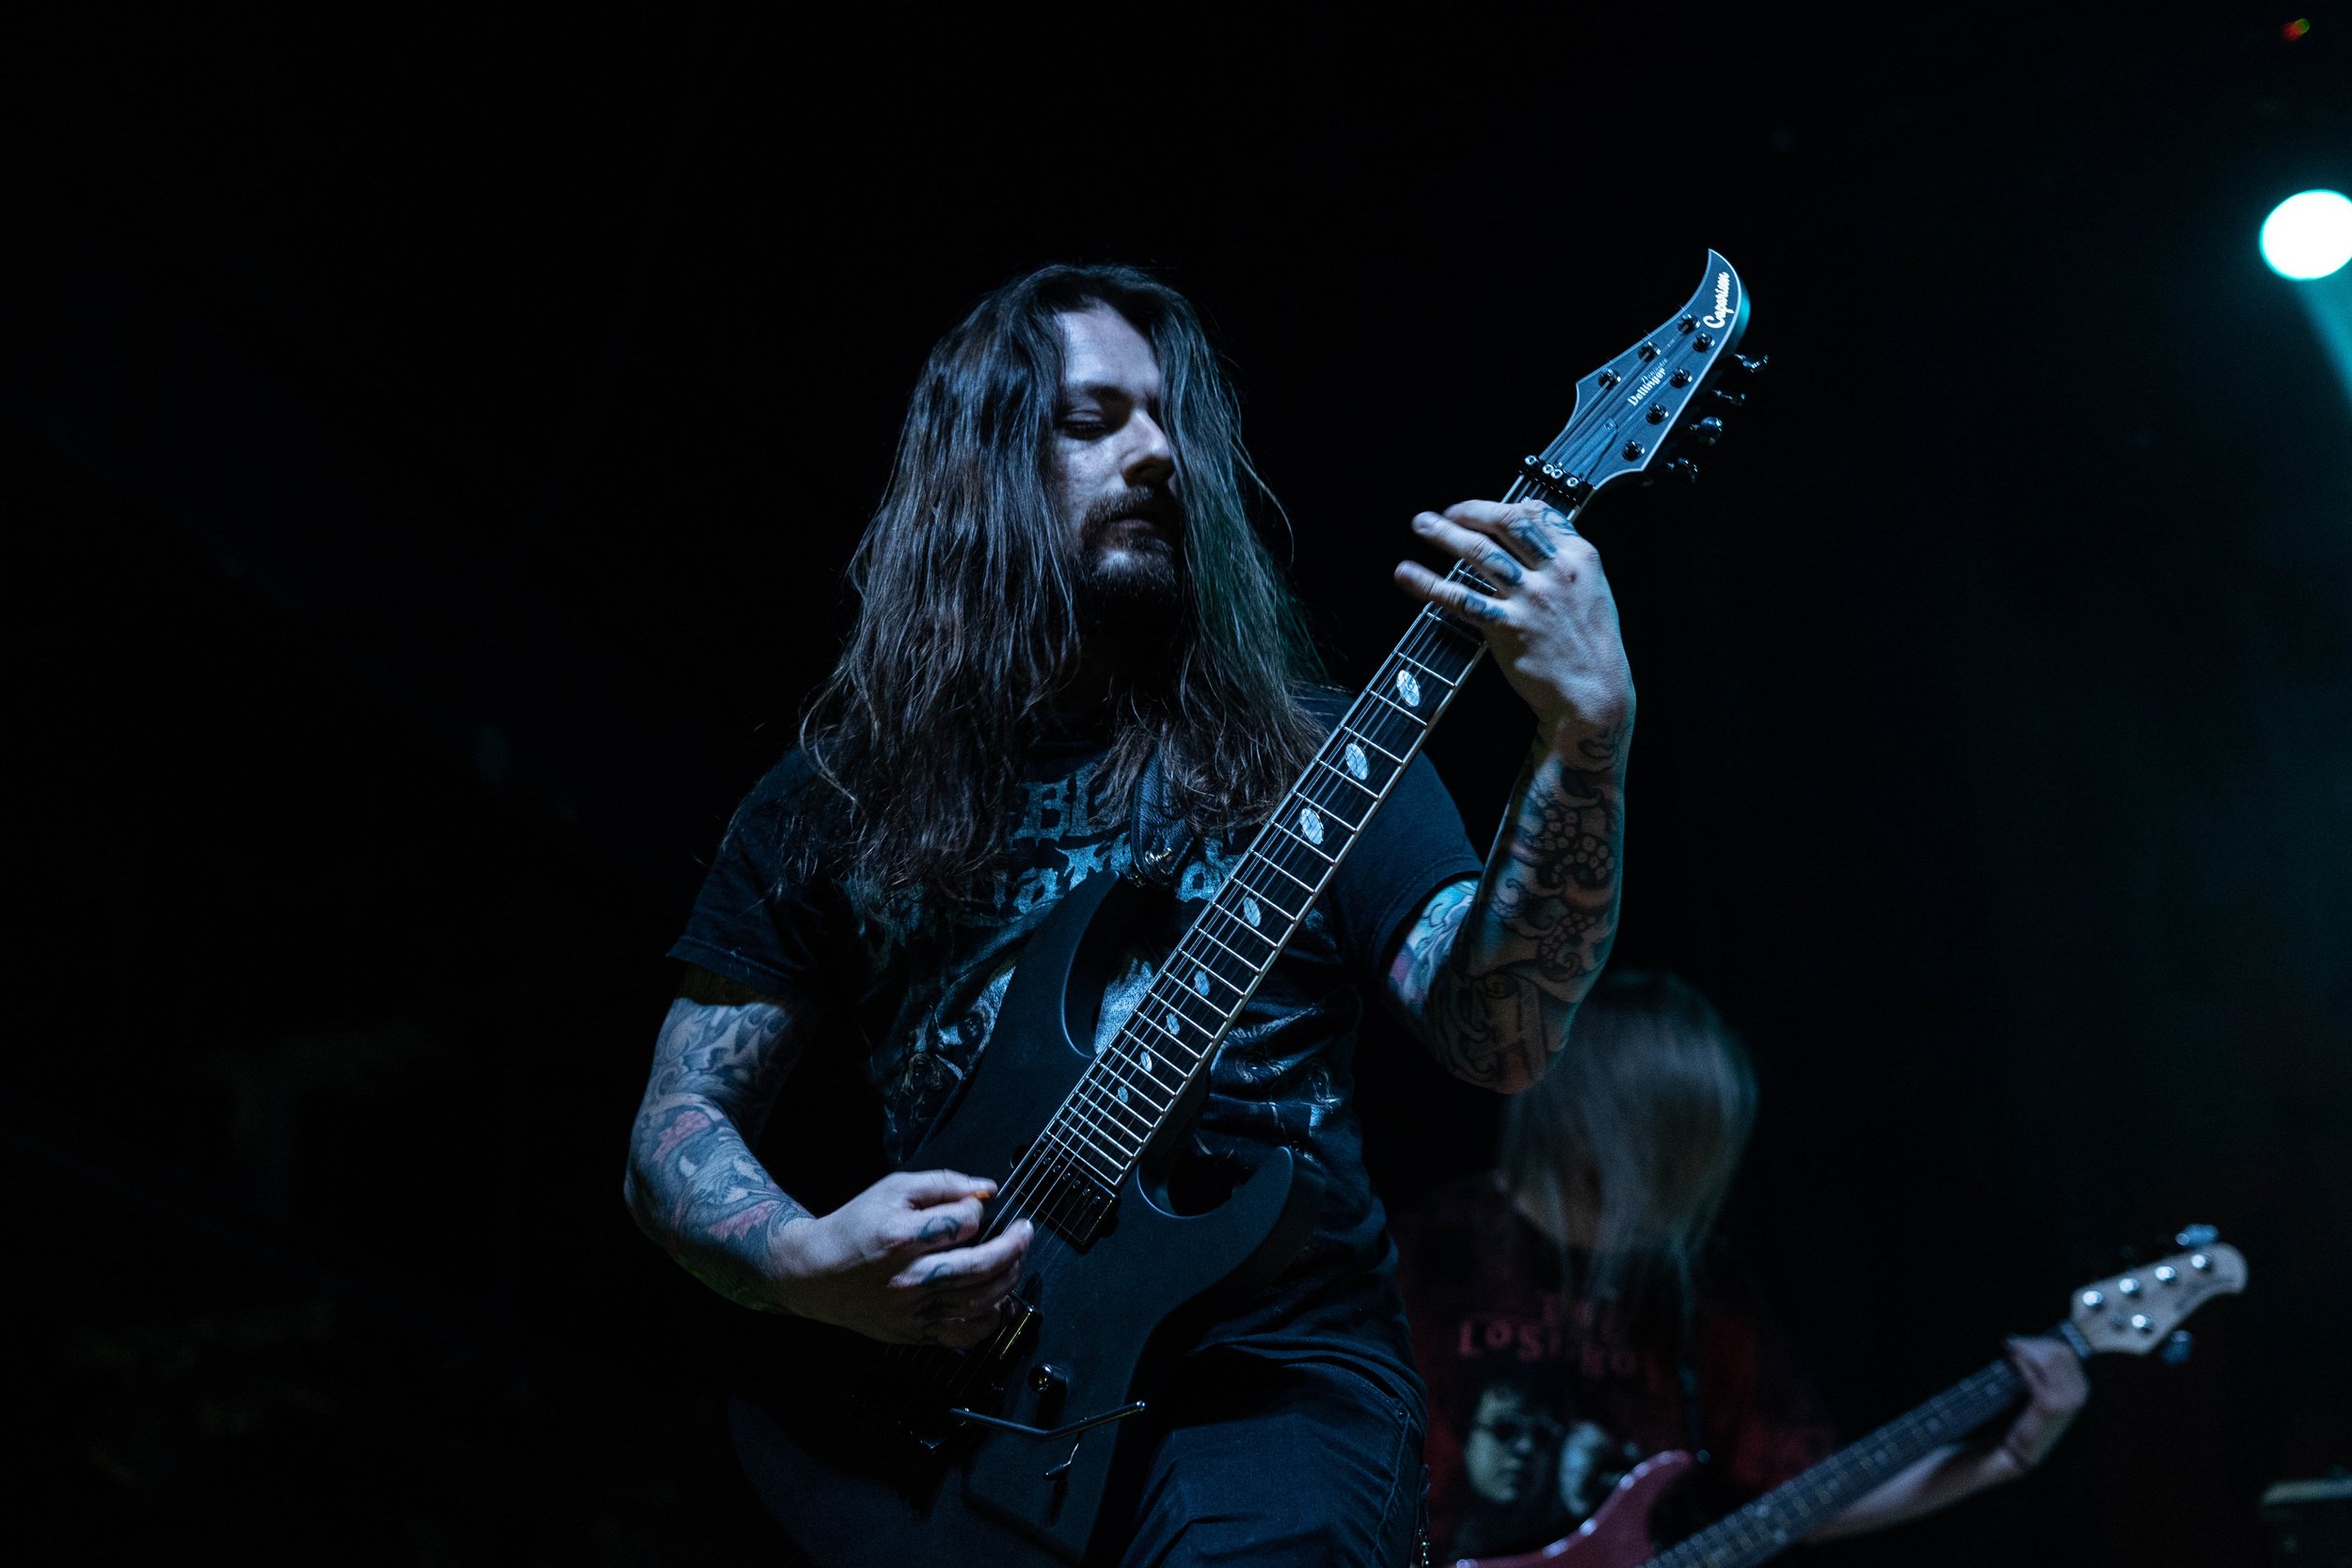 Angelmaker at The Masquerade